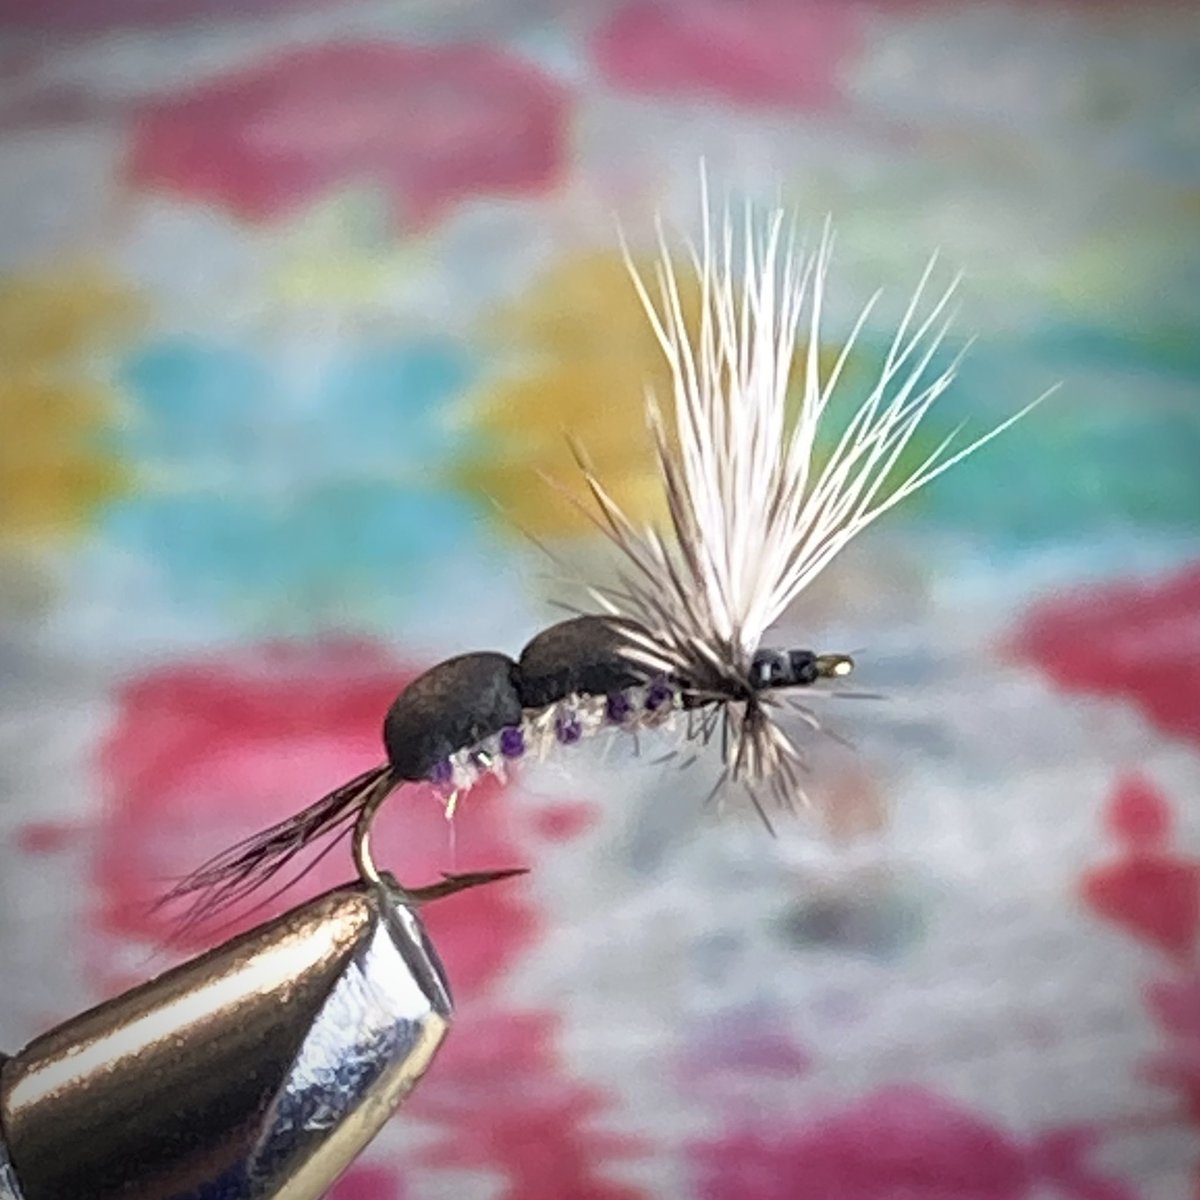 The Double Bub. I love to fish dry flies so I created something I wanted but never saw in fly shops. That’s the amazing thing about tying your own flies. All you have to do is imagine it. This color pattern is called Purple Drink and it works! #flyfishing #dryflies #fishing